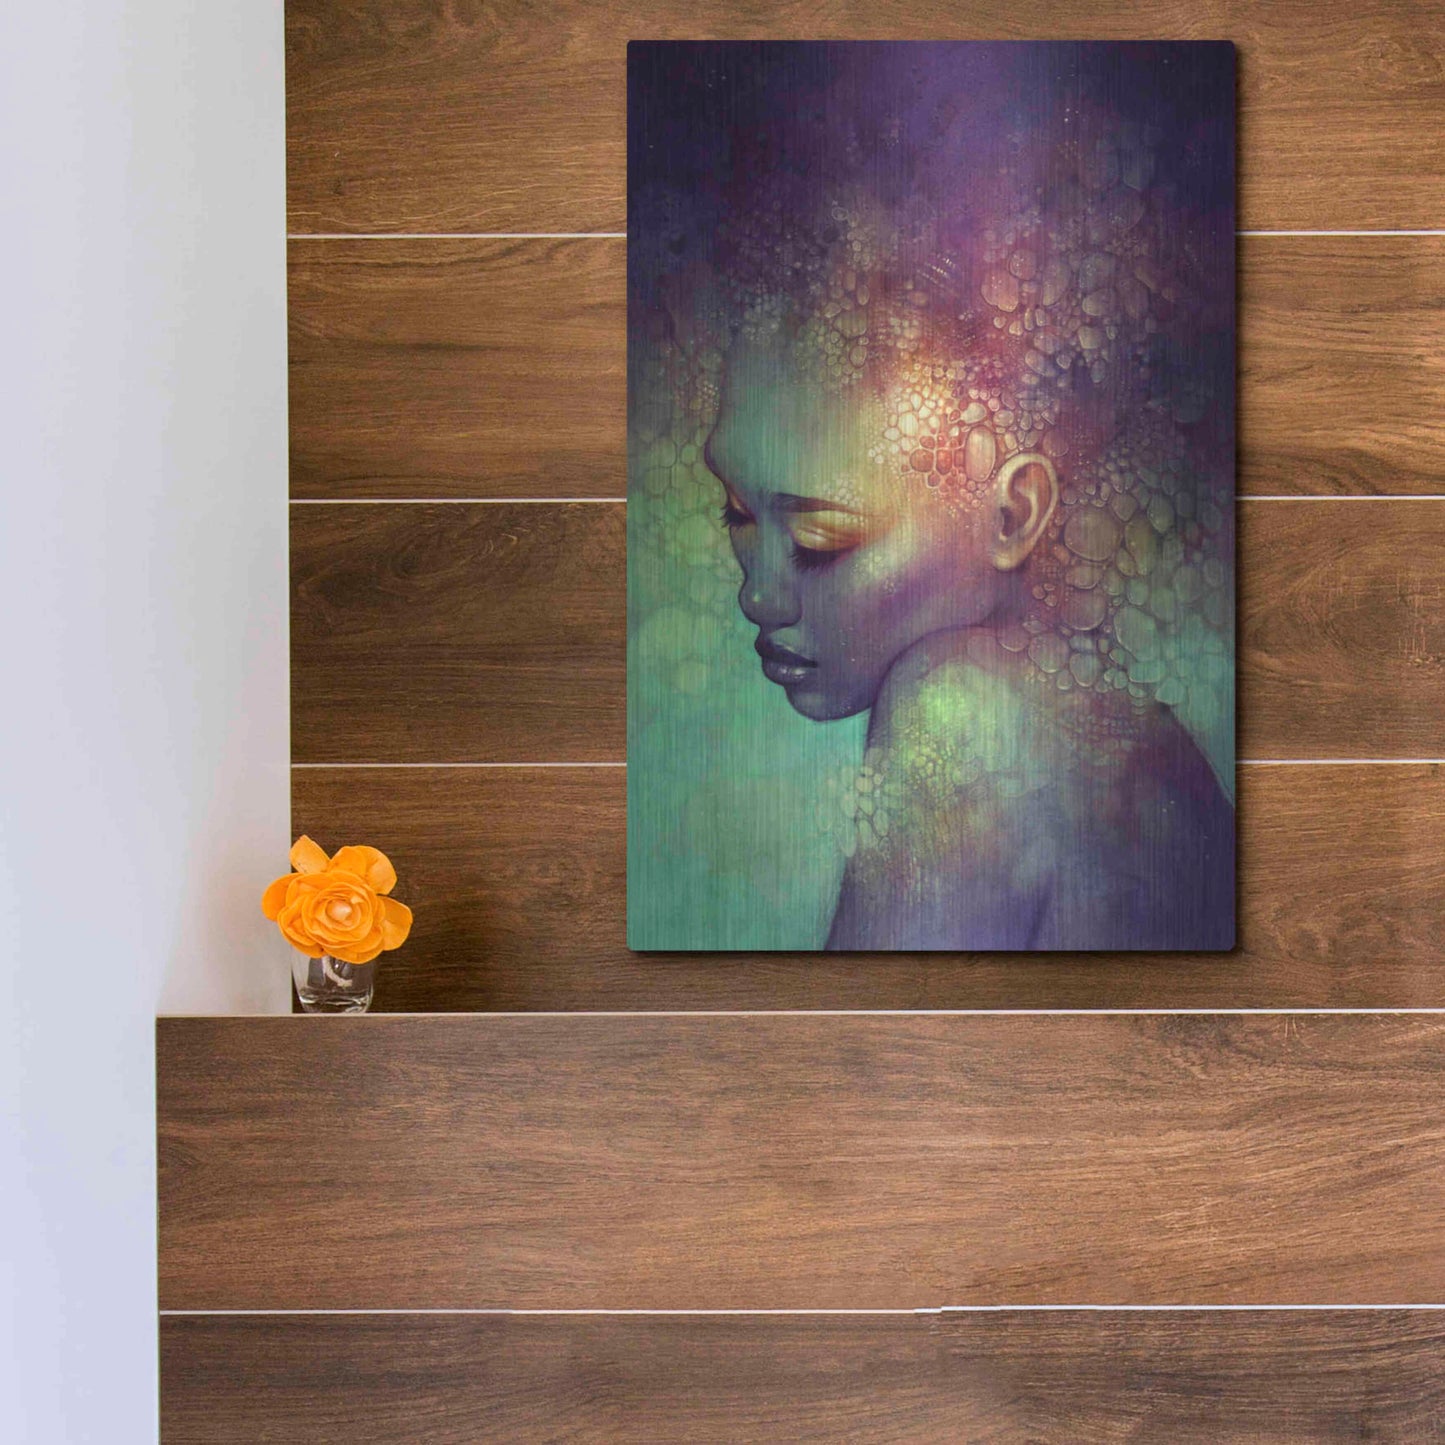 Luxe Metal Art 'Camouflage' by Anna Dittman, Metal Wall Art,12x16